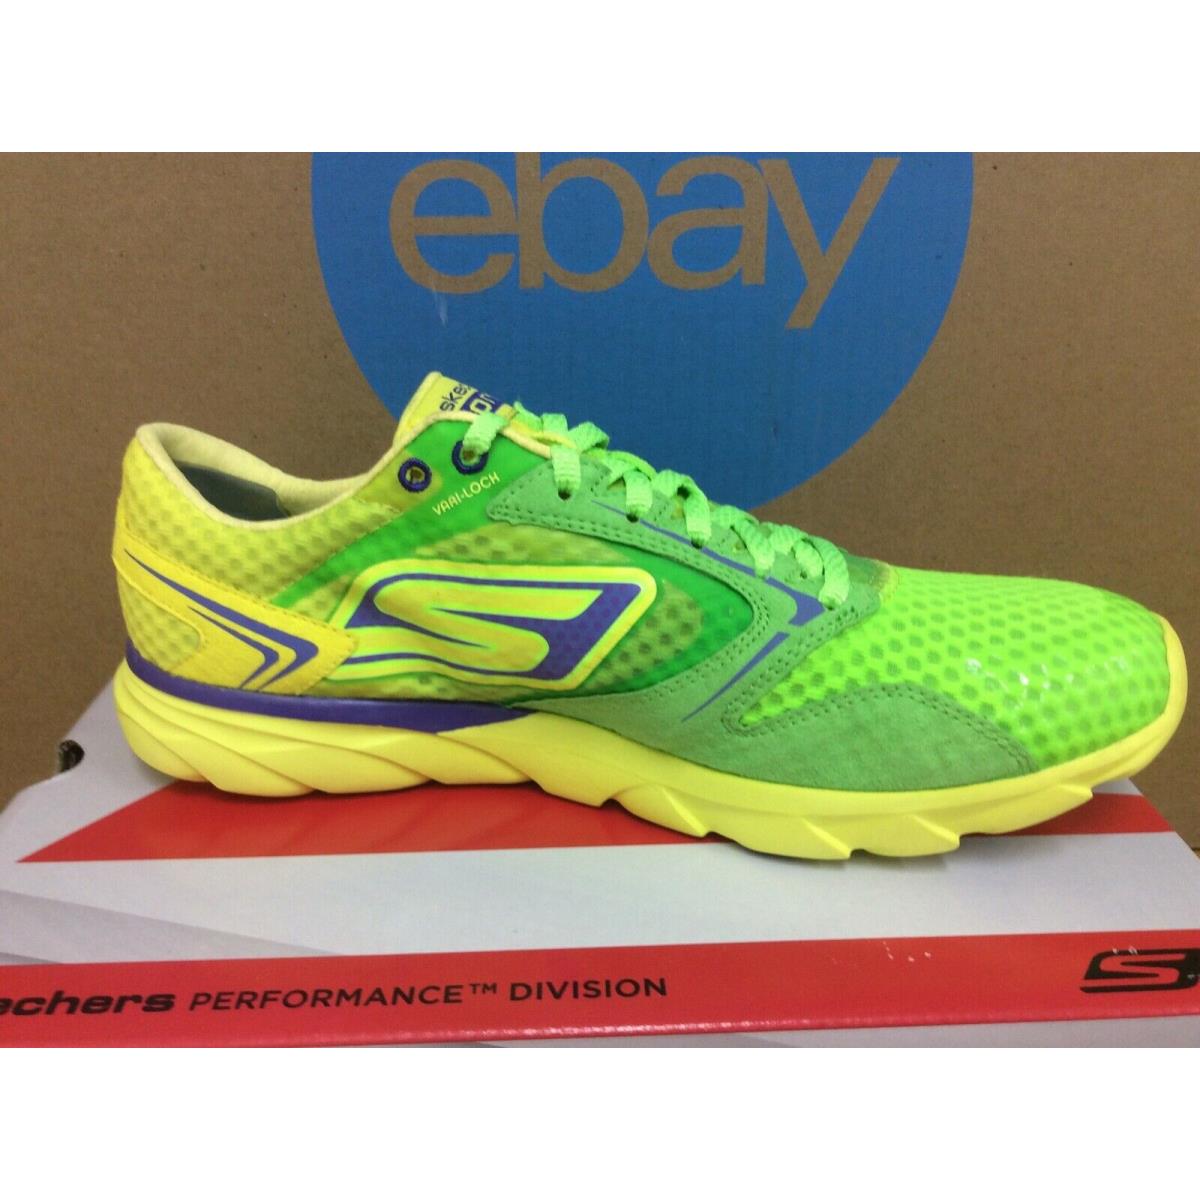 Skechers shoes Run Speed - Gray Lime 0